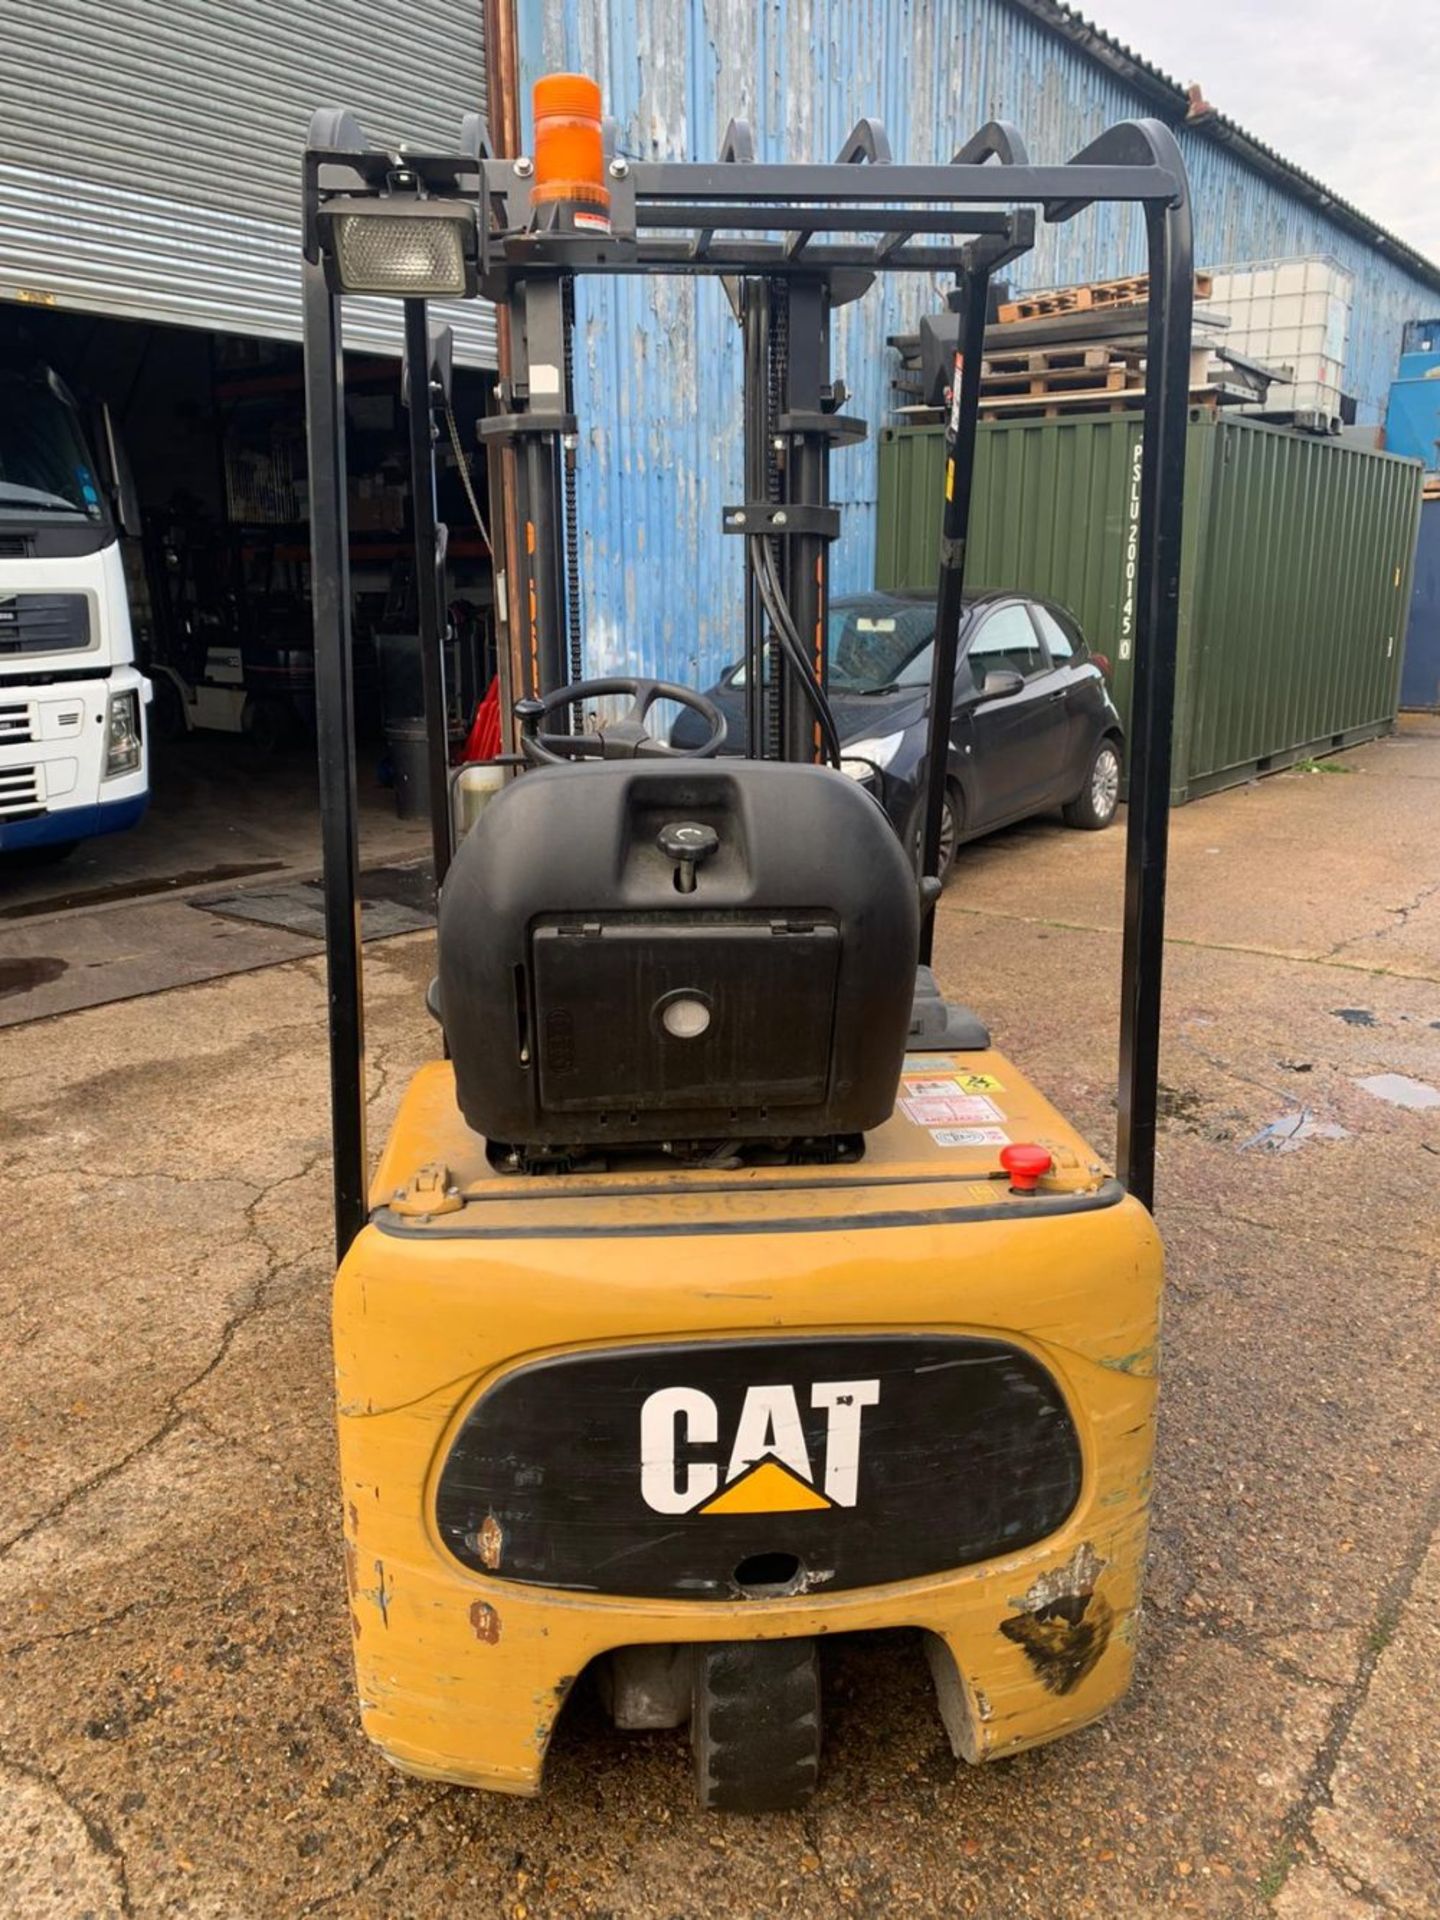 CATERPILLAR EP12KRT-PAC BATTERY FORKLIFT TRUCK, YEAR 2016 BUILD. 1.2 TONNE RATED. WHEN TESTED WAS S - Image 2 of 17